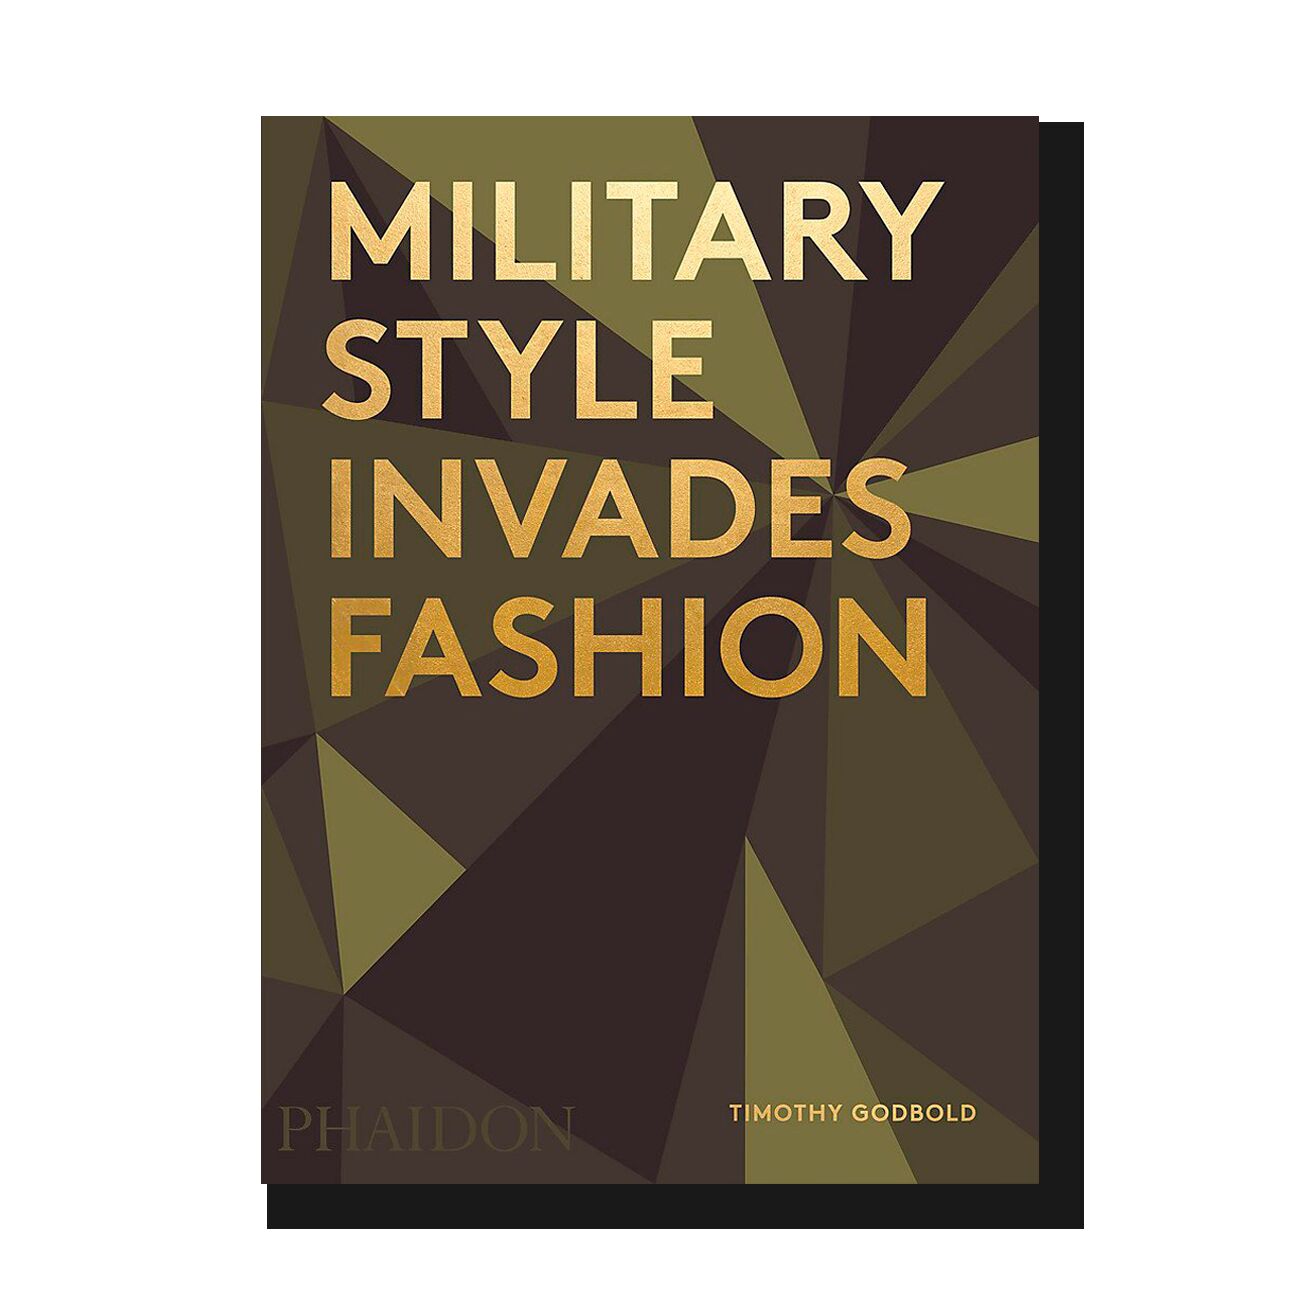 Military Style Invades Fashion